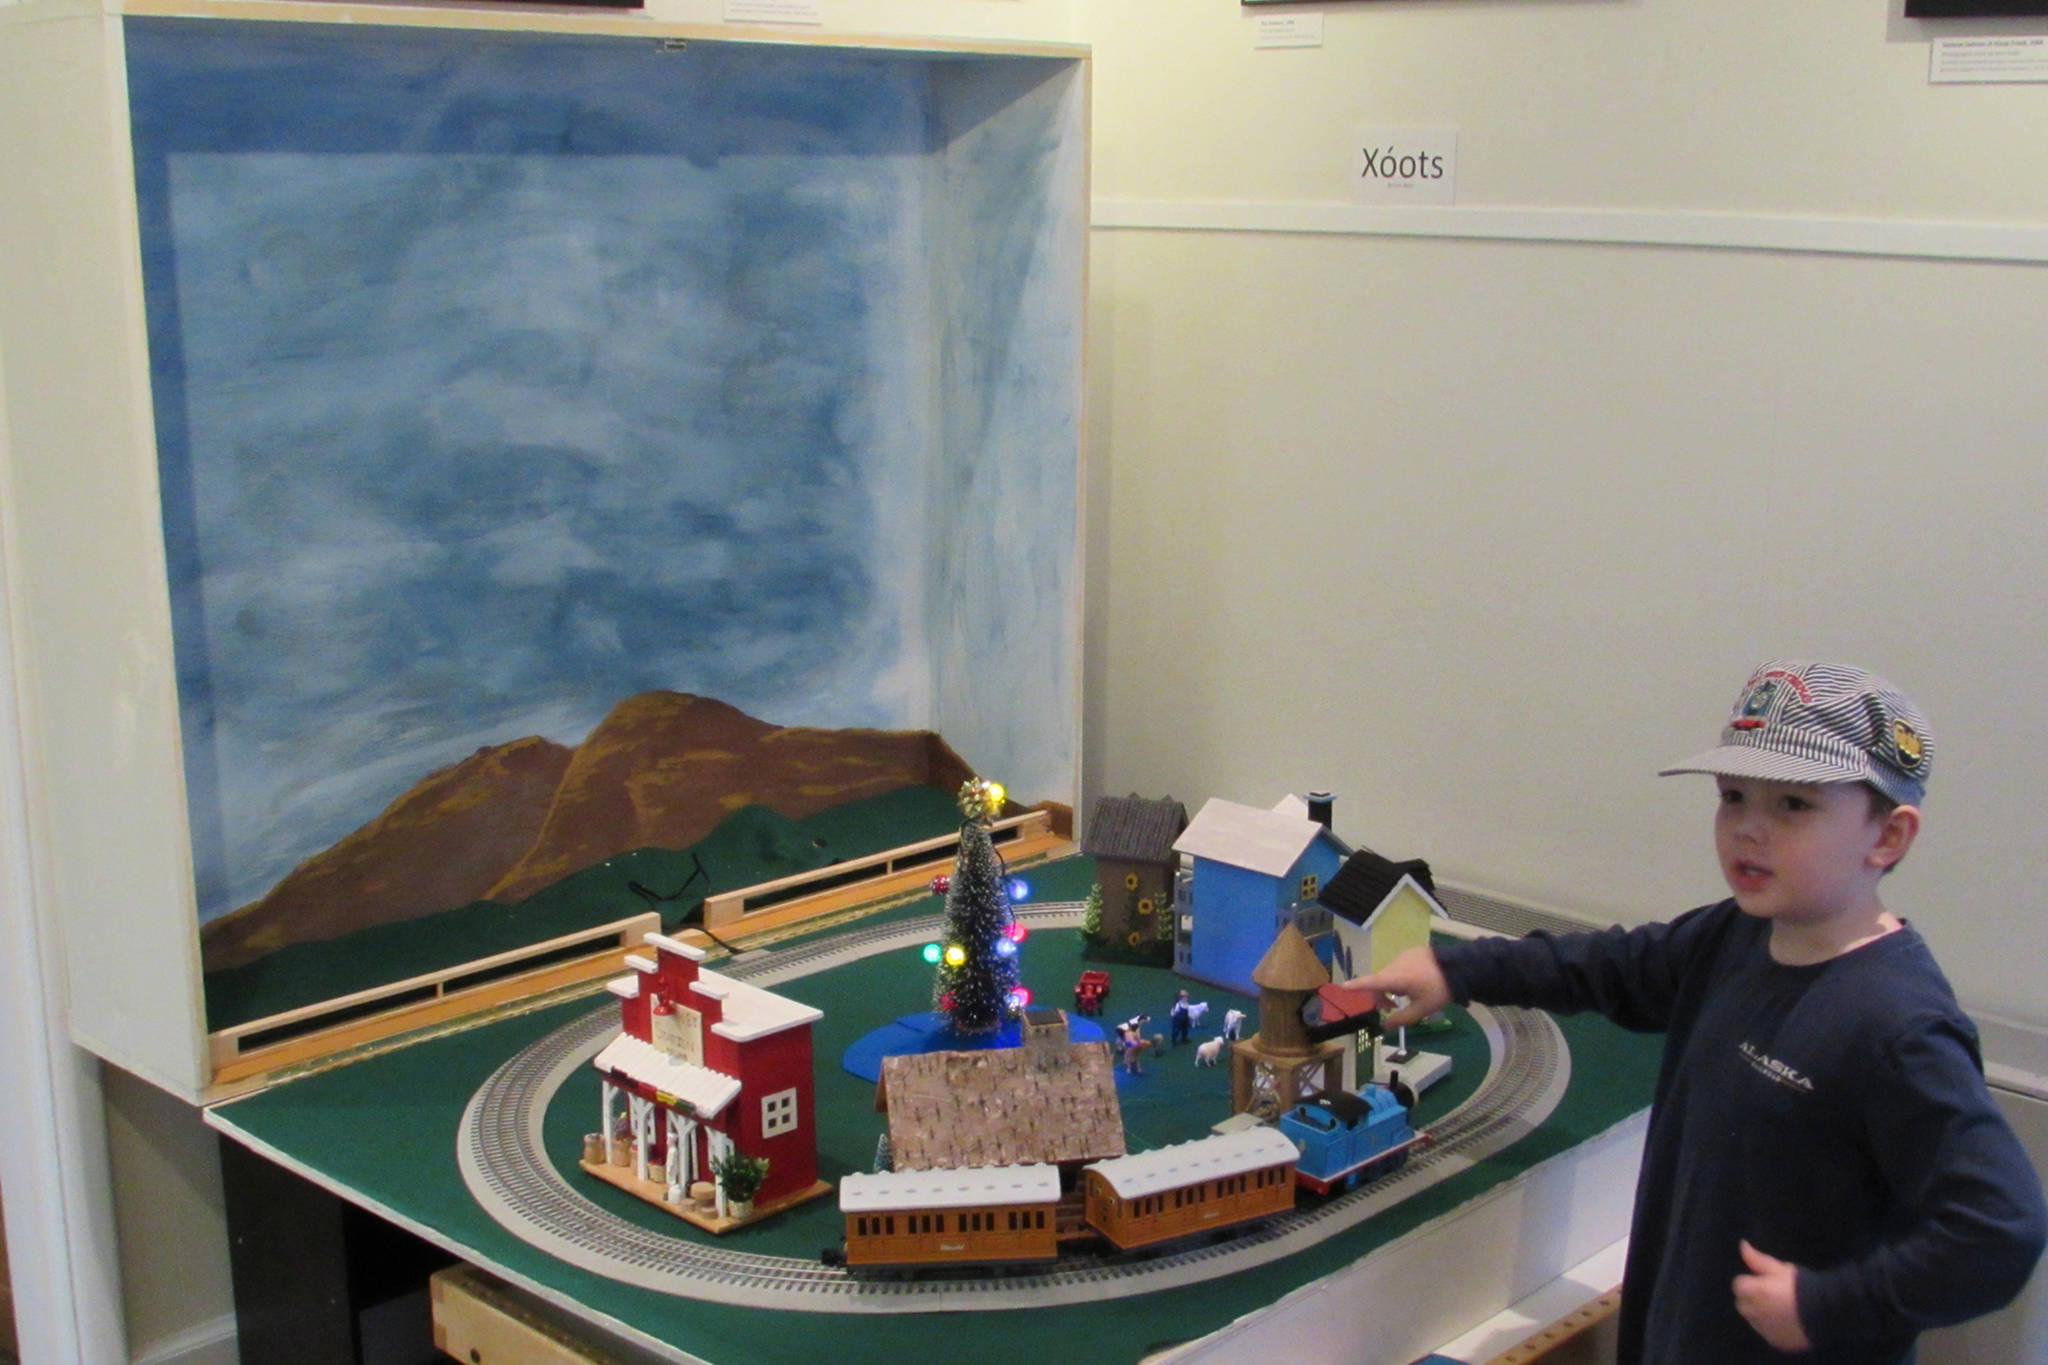 Alec Muldoon, 5, had a train-in-a-box set up at Juneau-Douglas City Museum Saturday, Dec. 22, 2018. Once opened up, the box provided a backdrop for the track. (Ben Hohenstatt | Capital City Weekly)